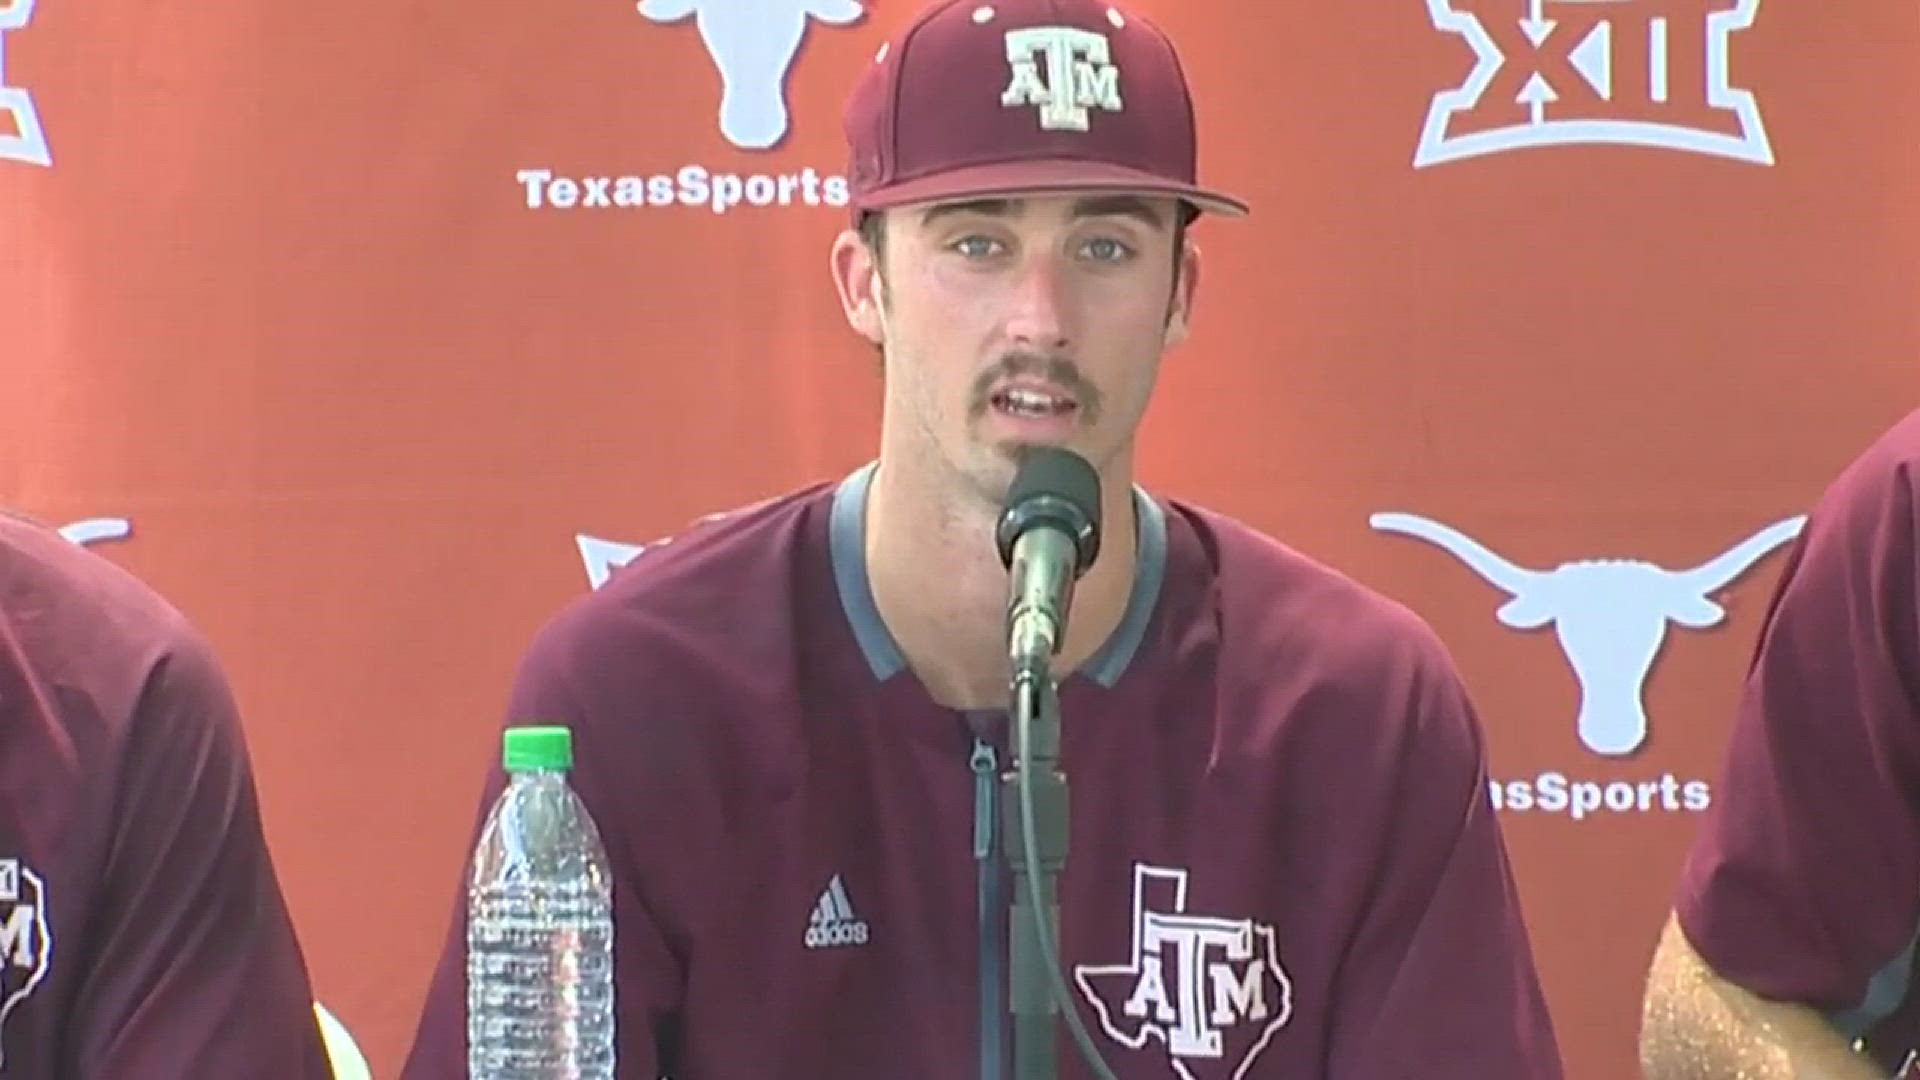 Texas A&M's baseball team responded to the question about potential of playing Texas  this weekend.